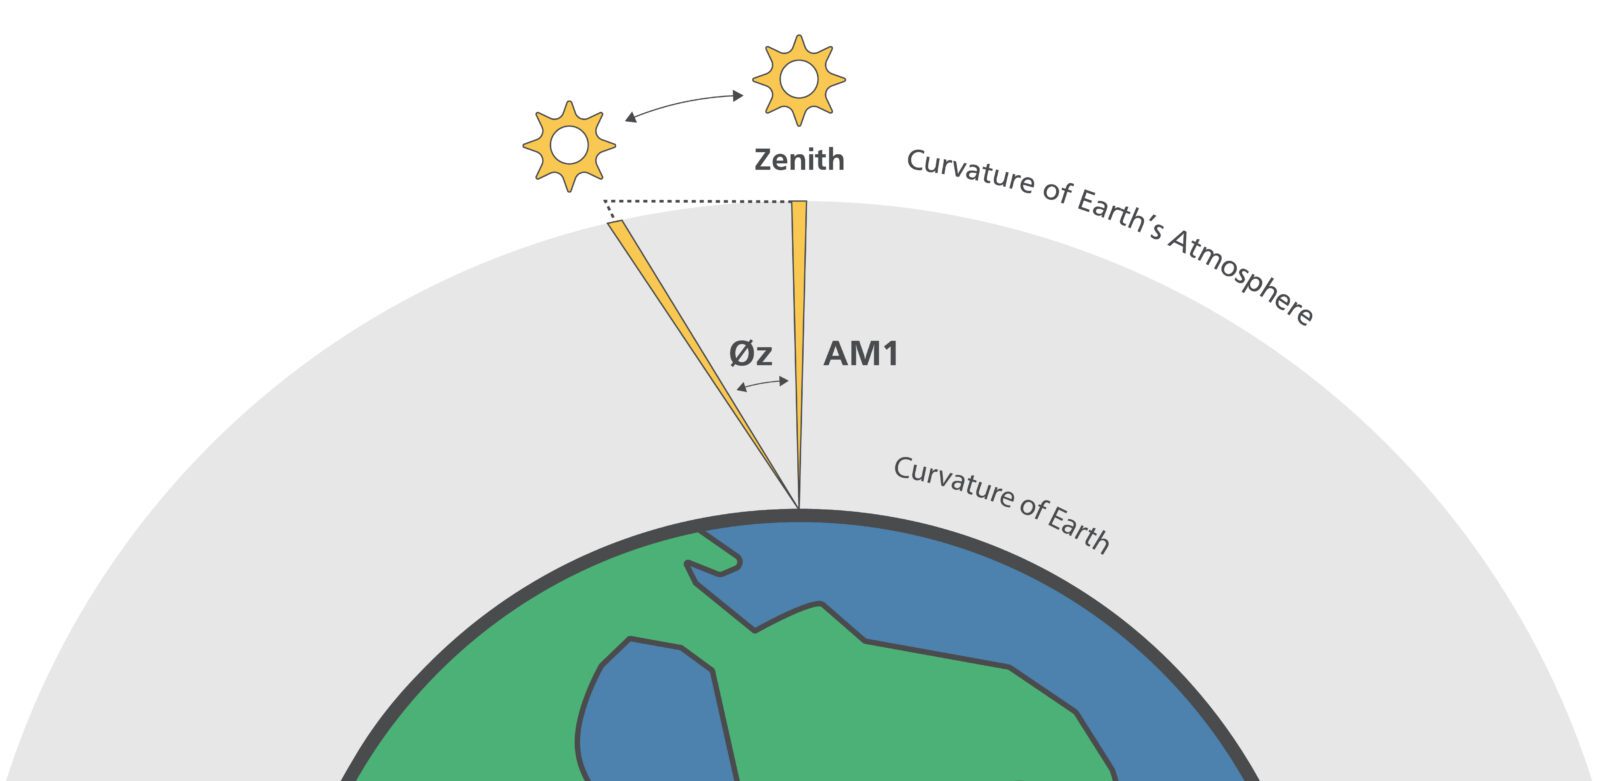 The simple-triangle model for calculating the air mass coefficient doesn’t account for the curvature of the Earth or its atmosphere, as shown in the dotted line above.